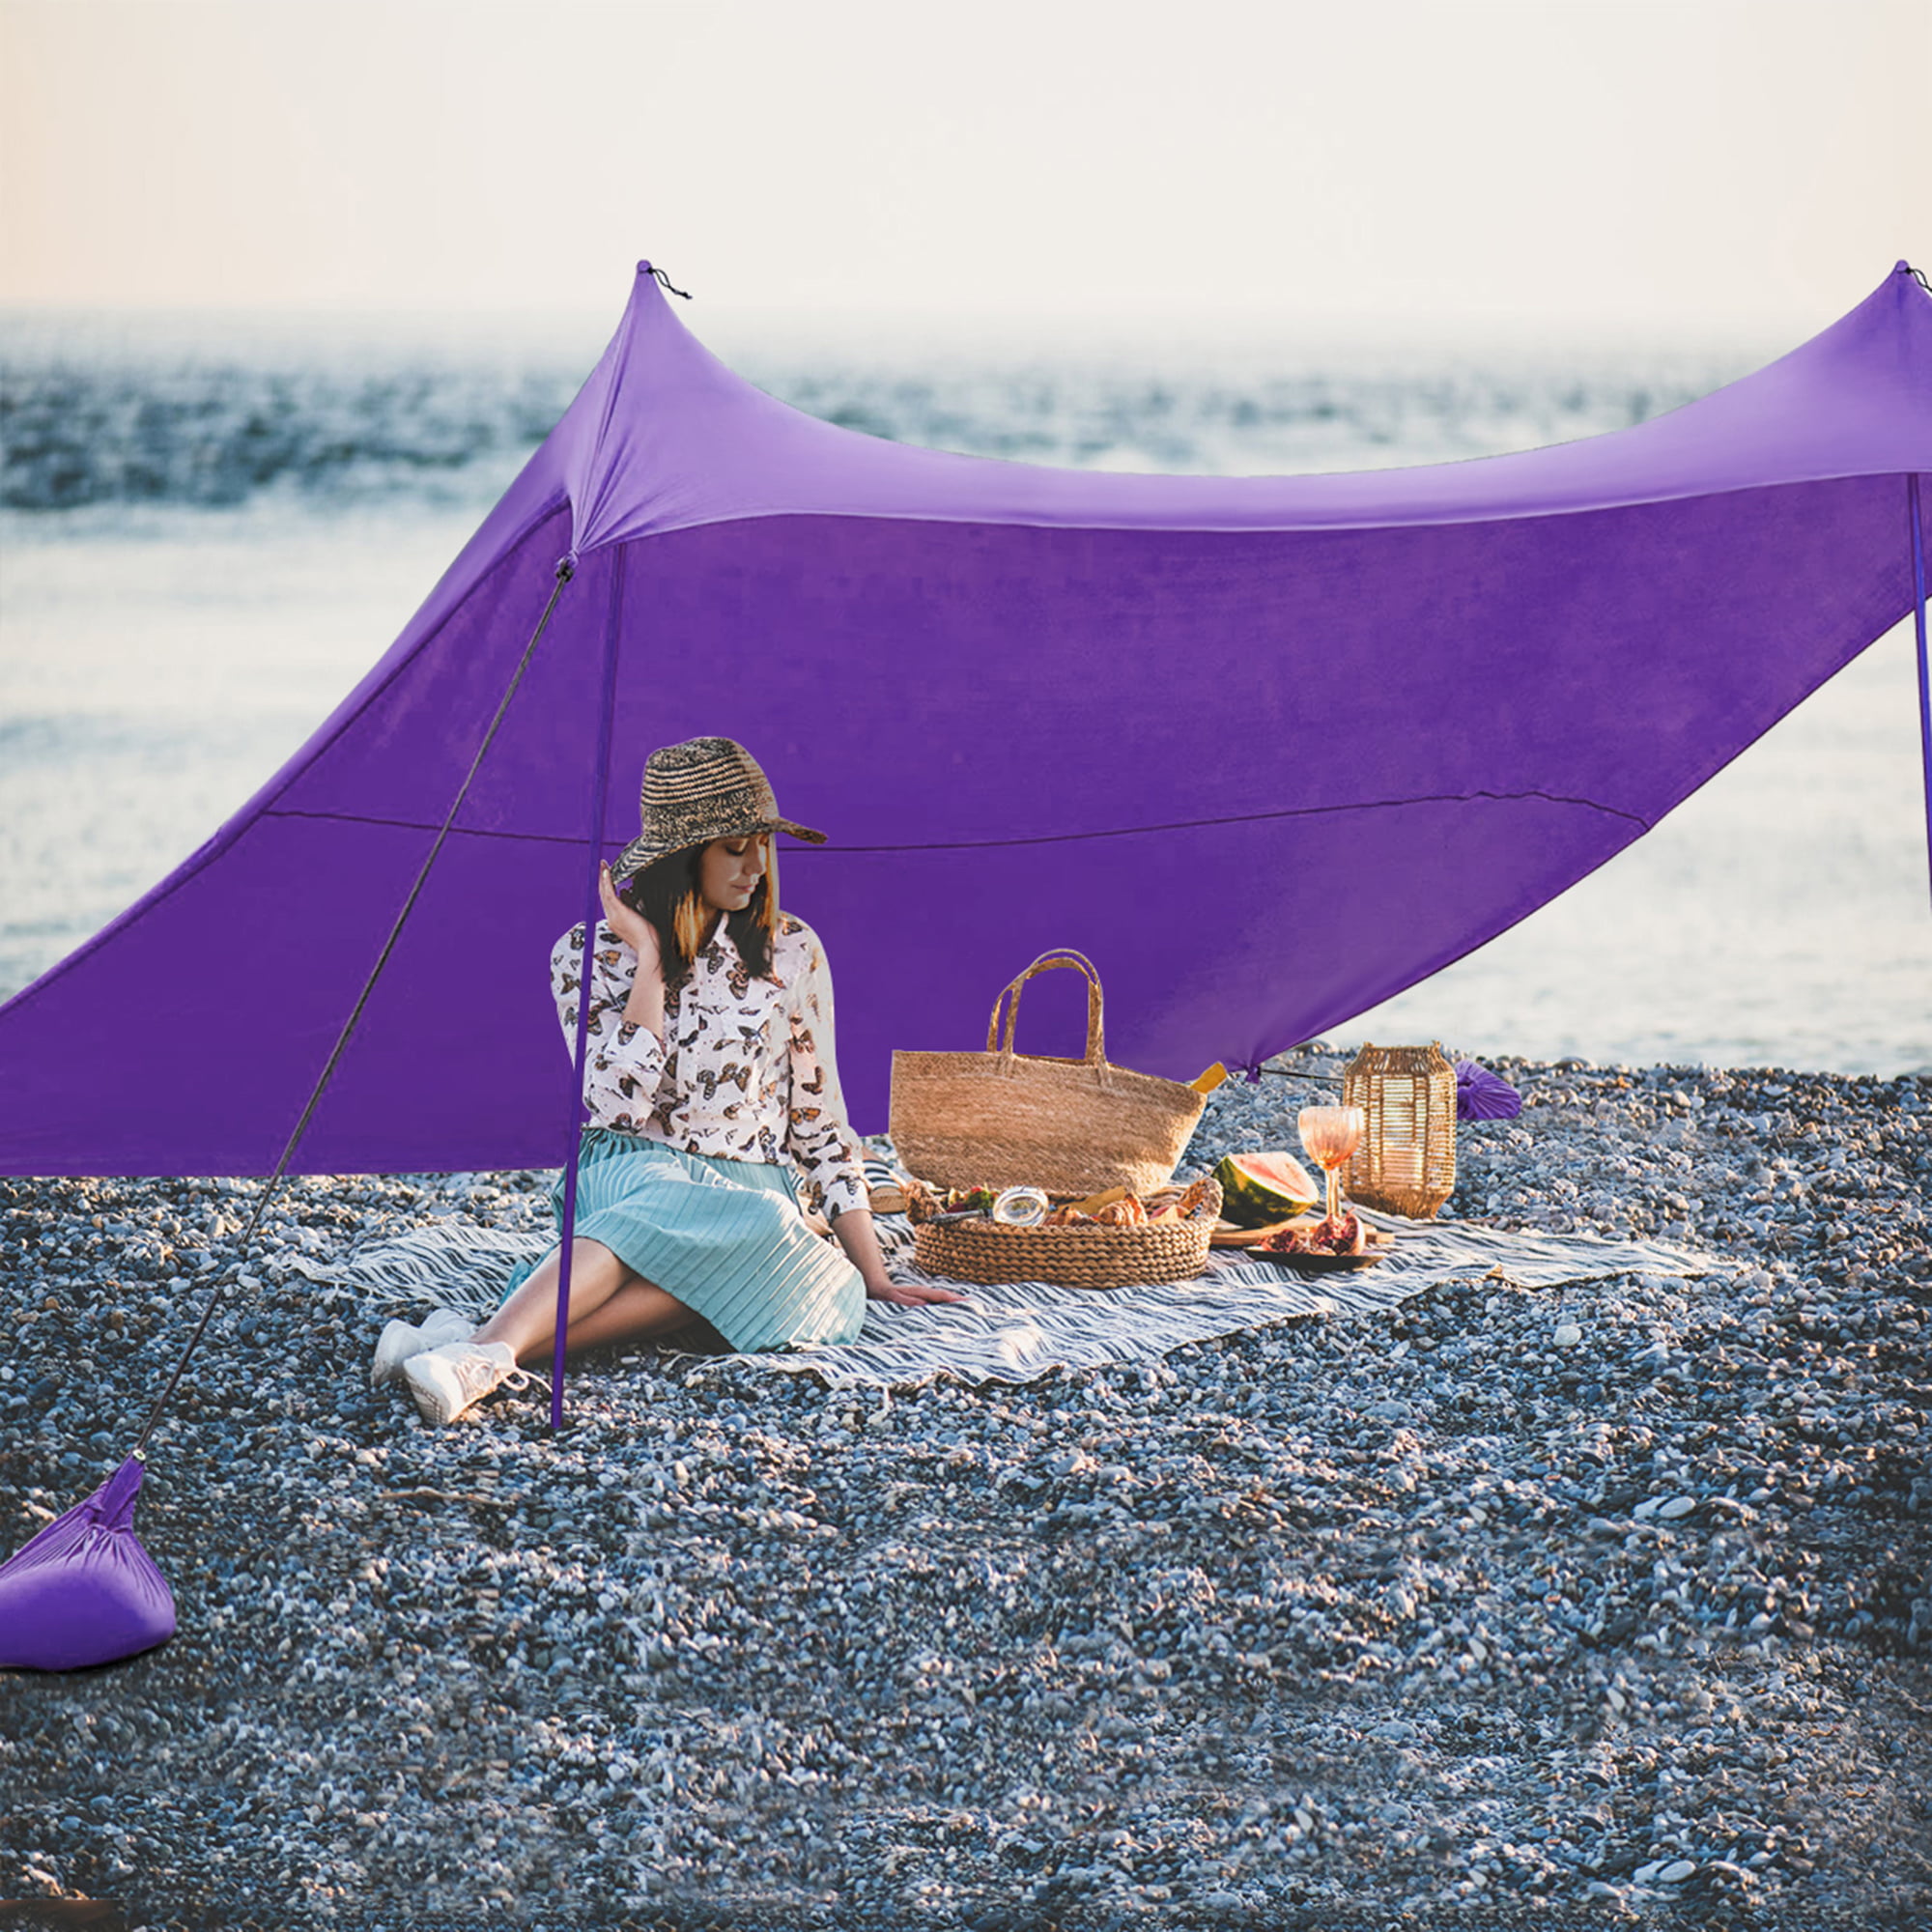 Gymax 7x7 FT Portable Beach Canopy Tent Shelter w/ Sand Anchor Carry Bag Purple